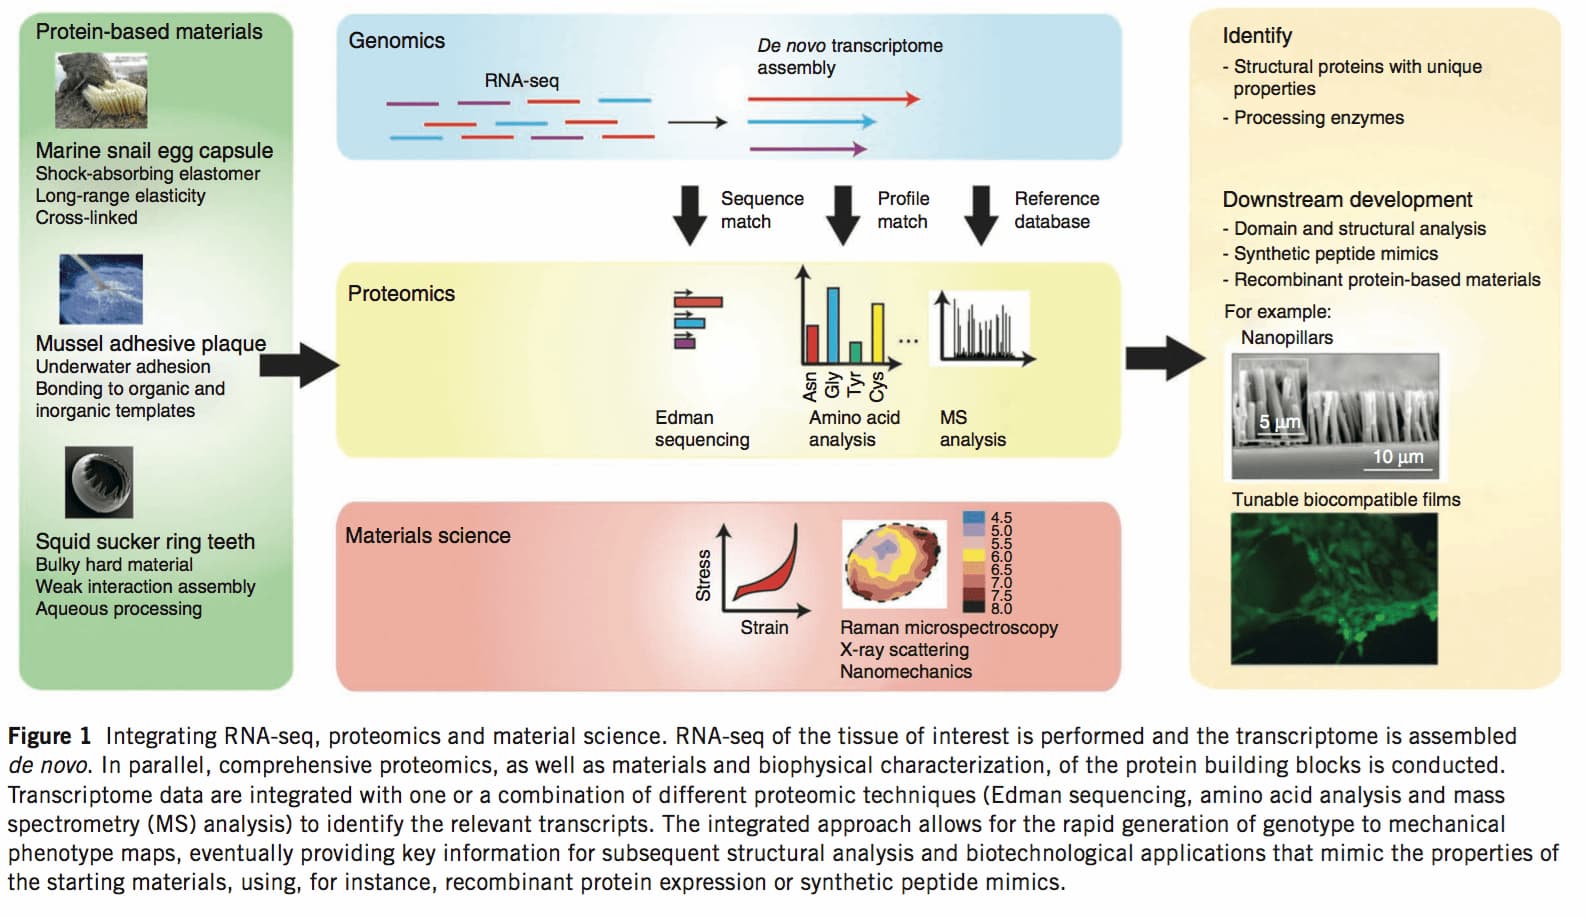 research approach summary shown by integrating RNA-seq with proteomics and materials science